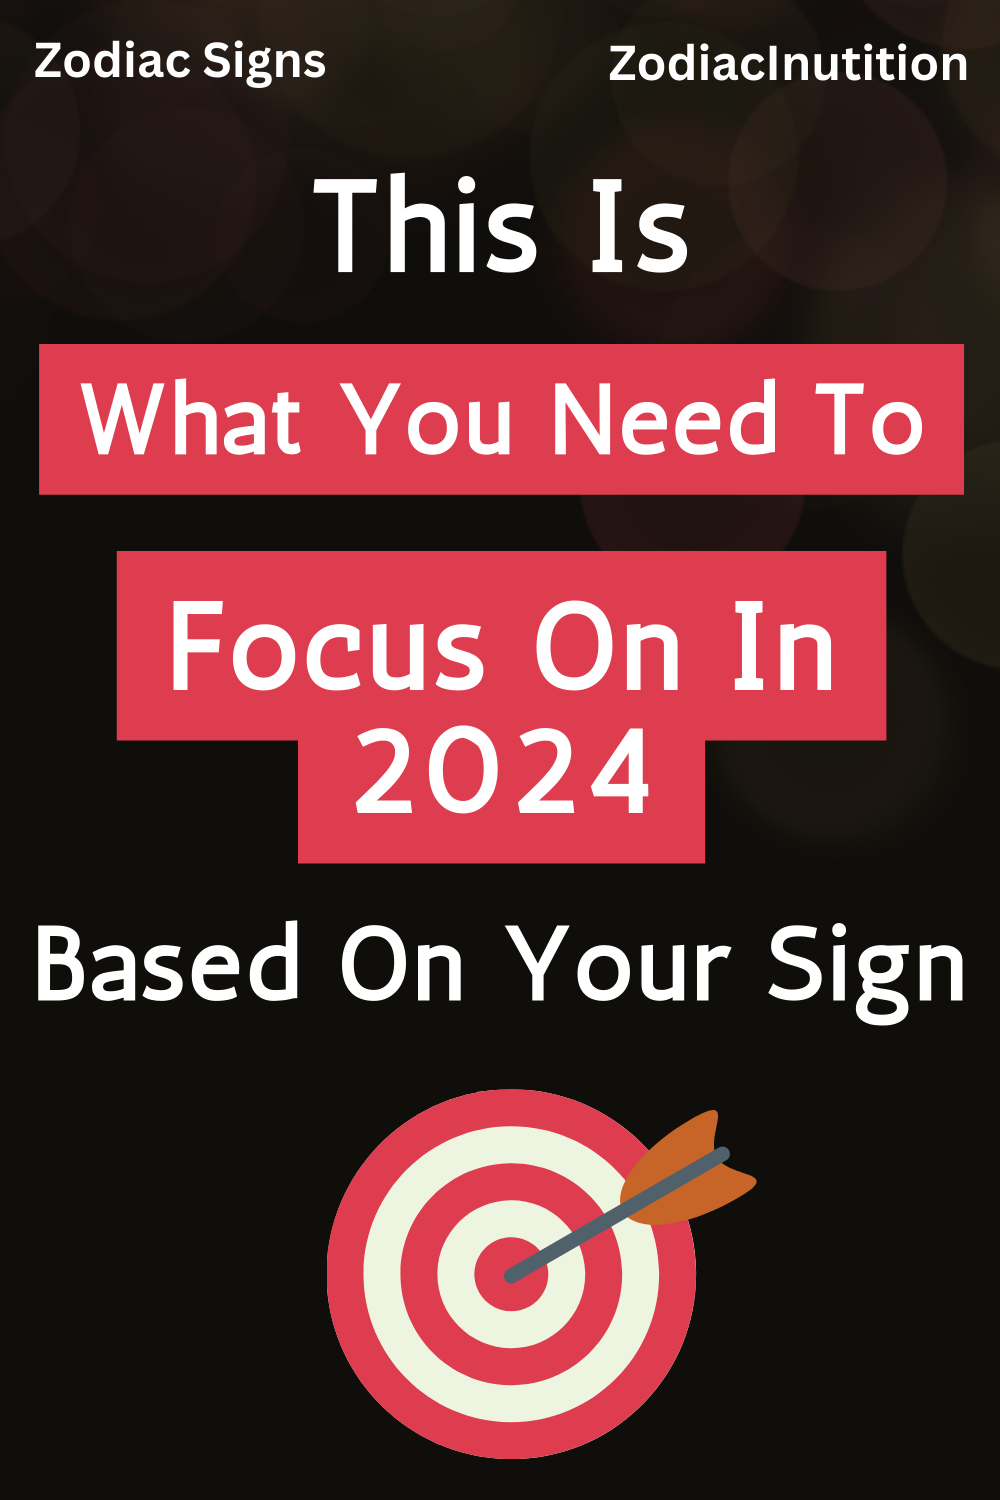 This Is What You Need To Focus On In 2024 Based On Your Sign